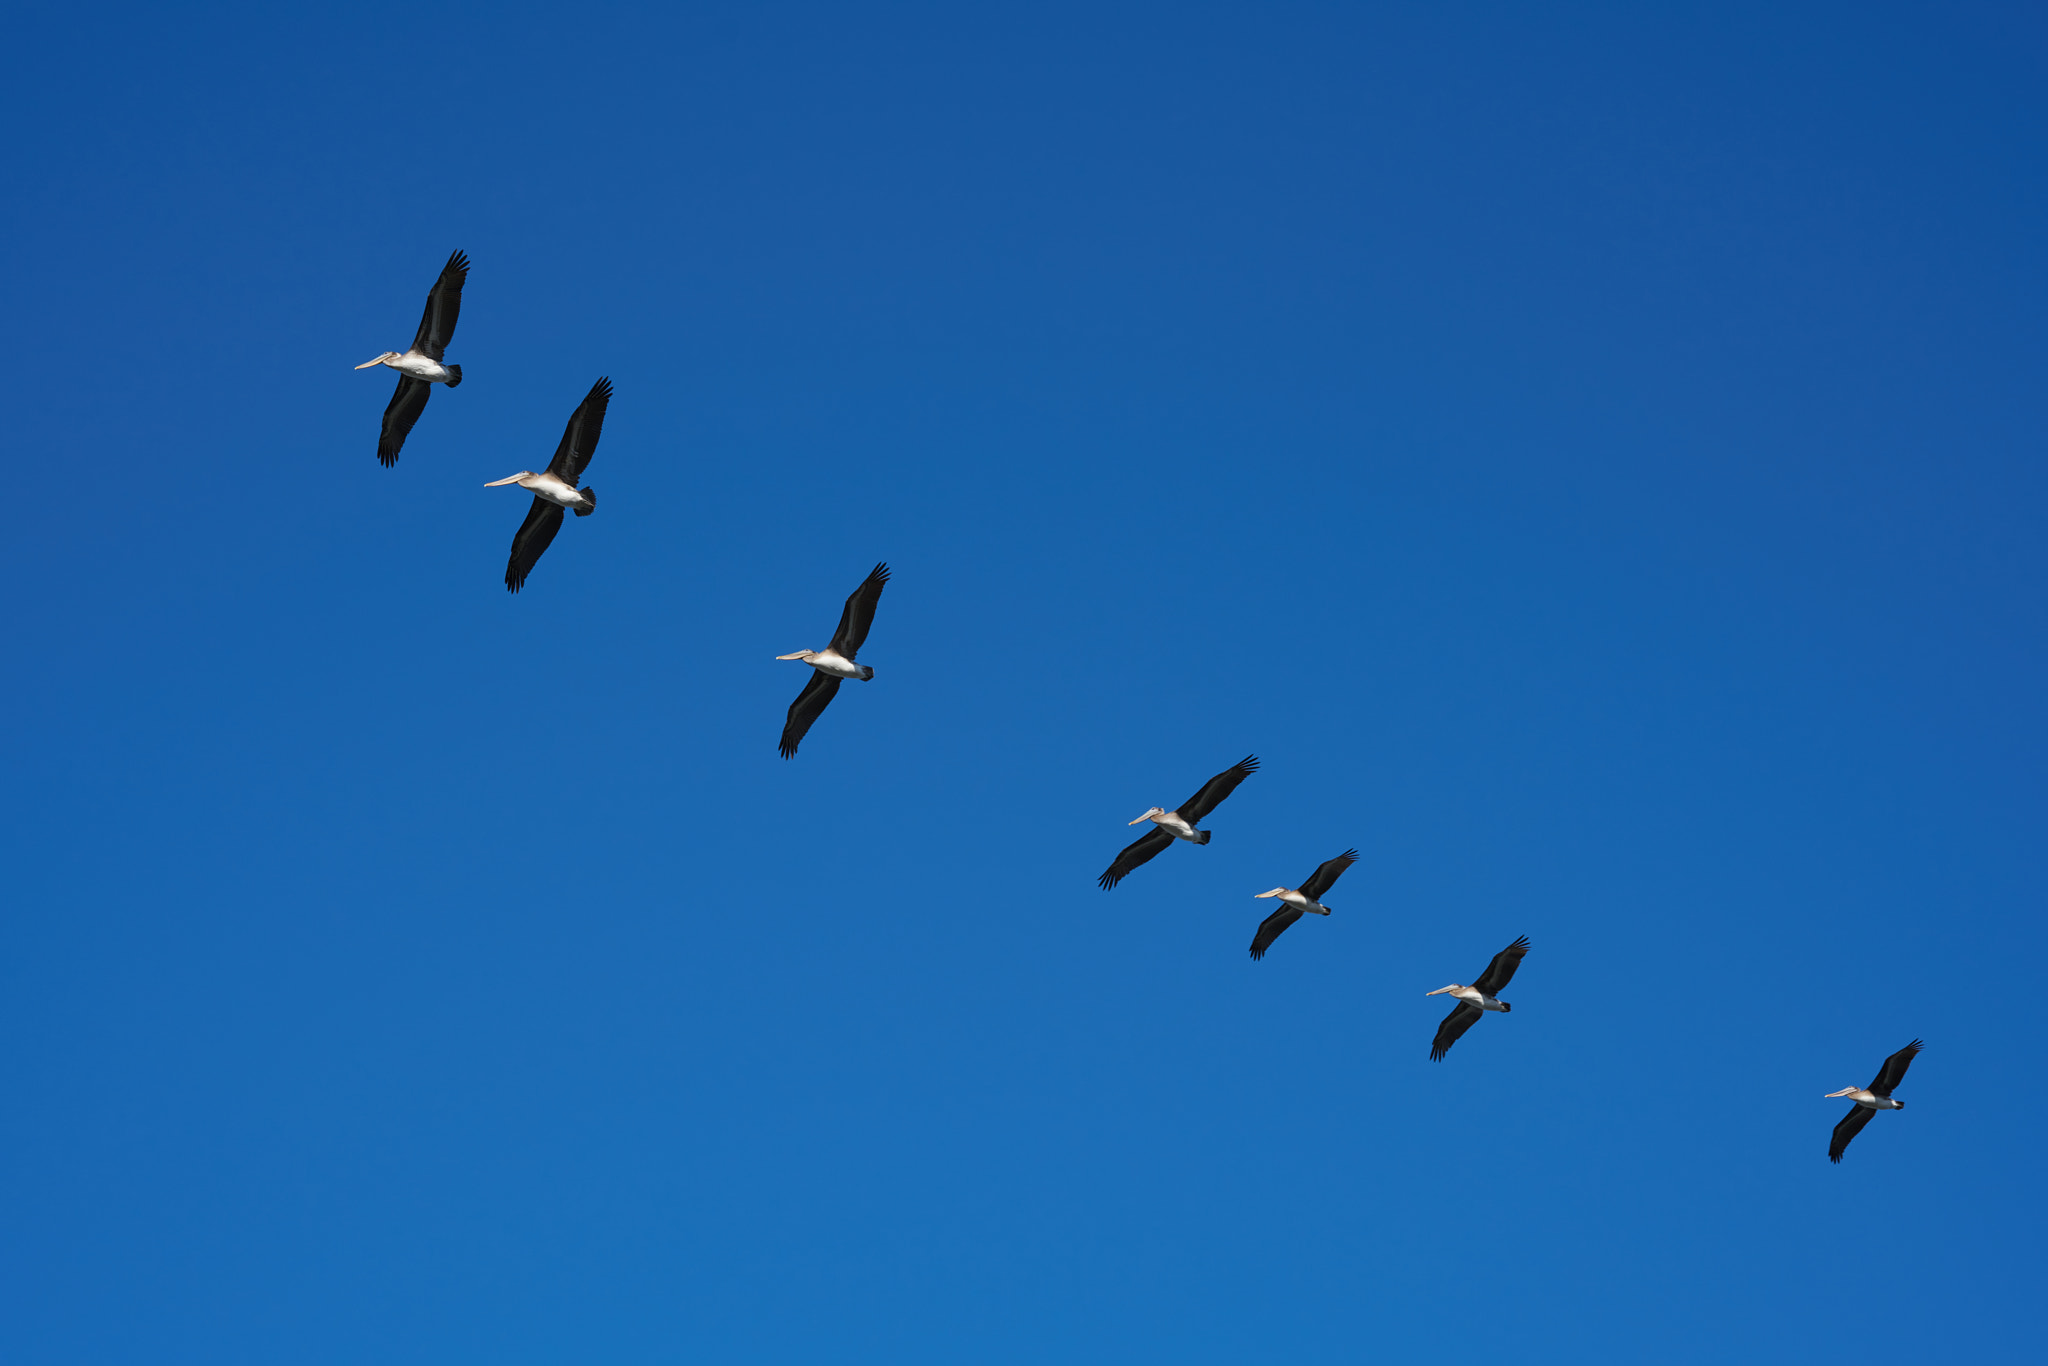 ZEISS Loxia 85mm F2.4 sample photo. Flight of the pelicans photography